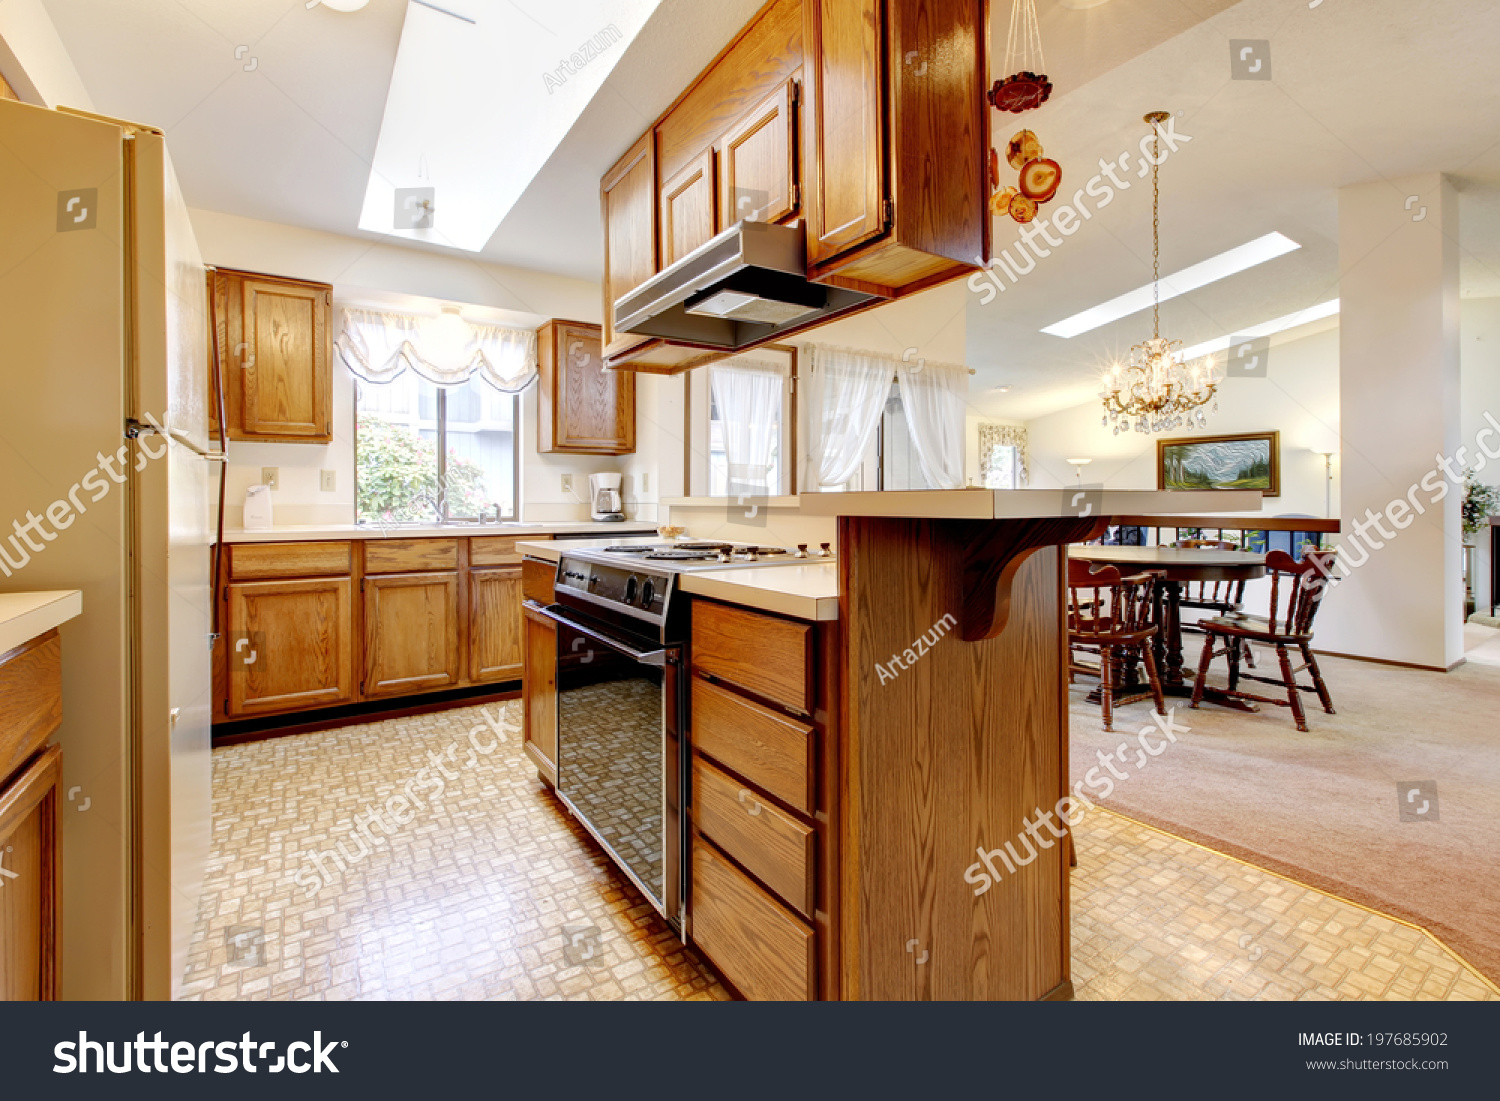 Bright Kitchen Room High Vaulted Ceiling Stock Photo Edit